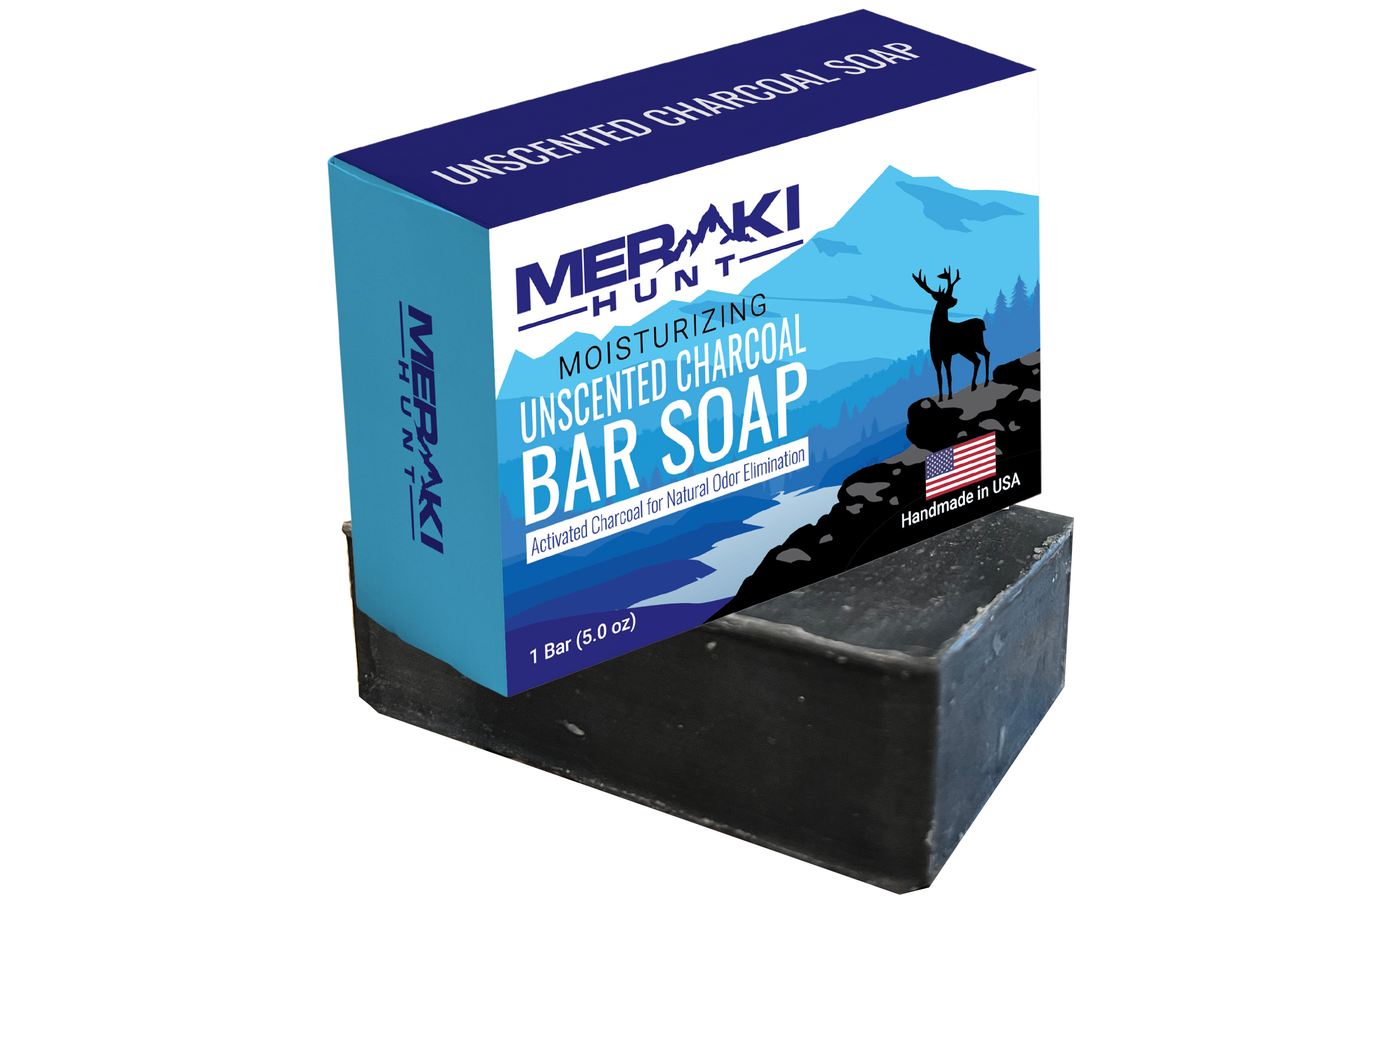 Meraki Hunt Unscented Bar Soap with Activated Charcoal